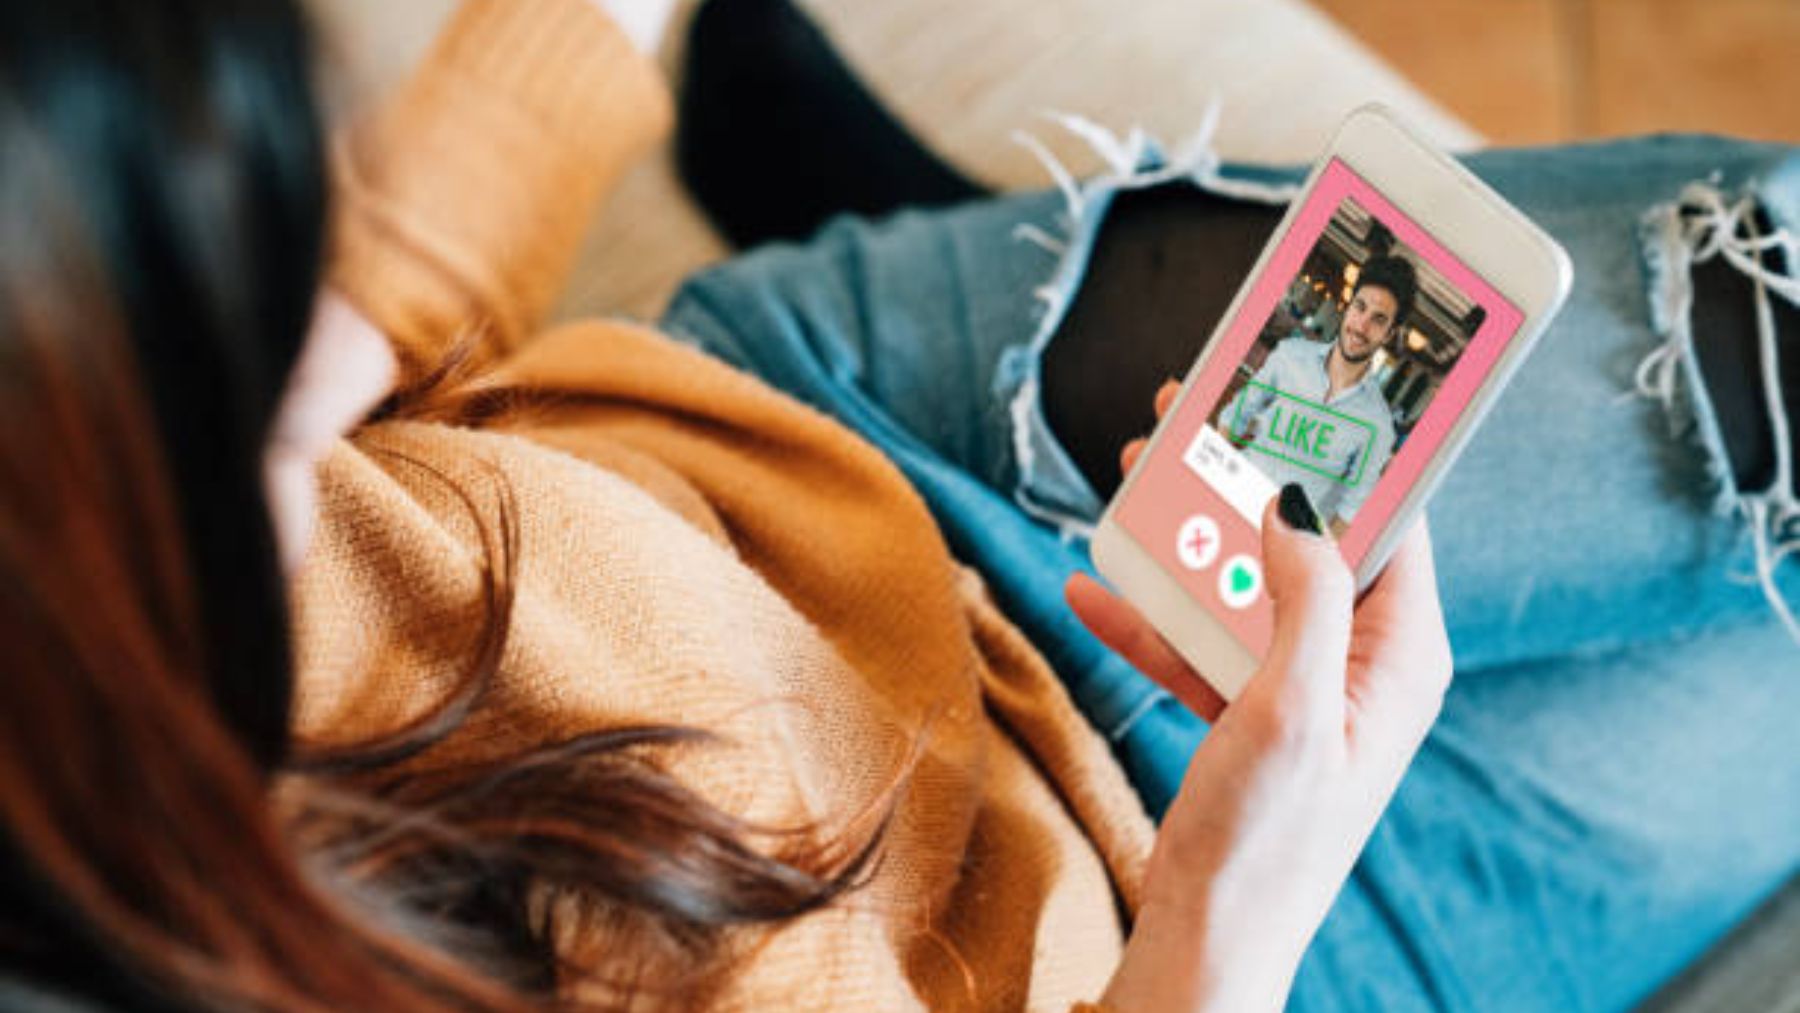 This is the key to success on Tinder according to science